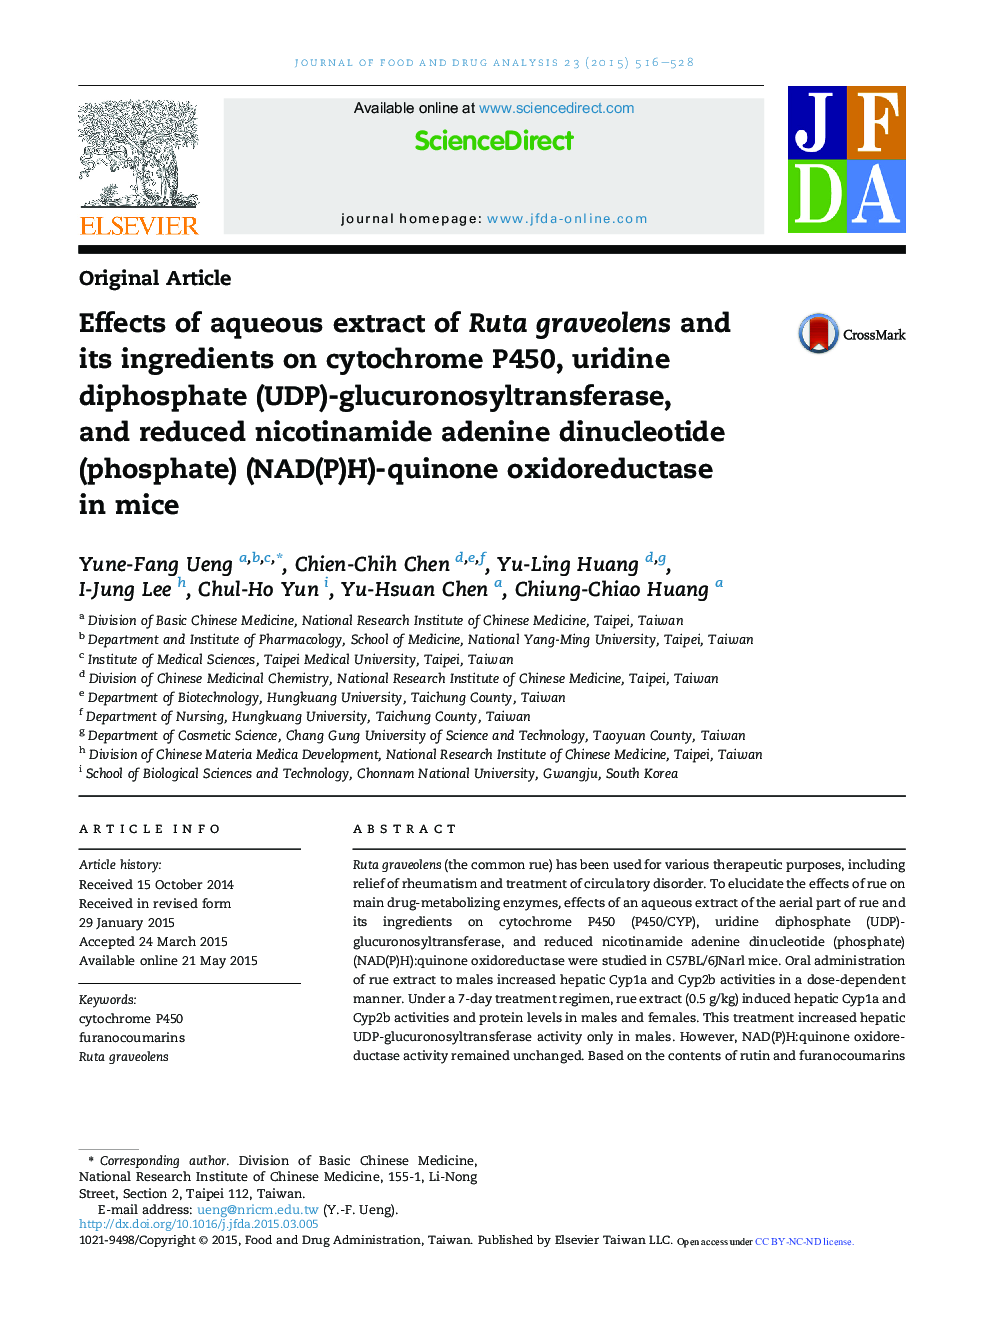 Effects of aqueous extract of Ruta graveolens and its ingredients on cytochrome P450, uridine diphosphate (UDP)-glucuronosyltransferase, and reduced nicotinamide adenine dinucleotide (phosphate) (NAD(P)H)-quinone oxidoreductase in mice